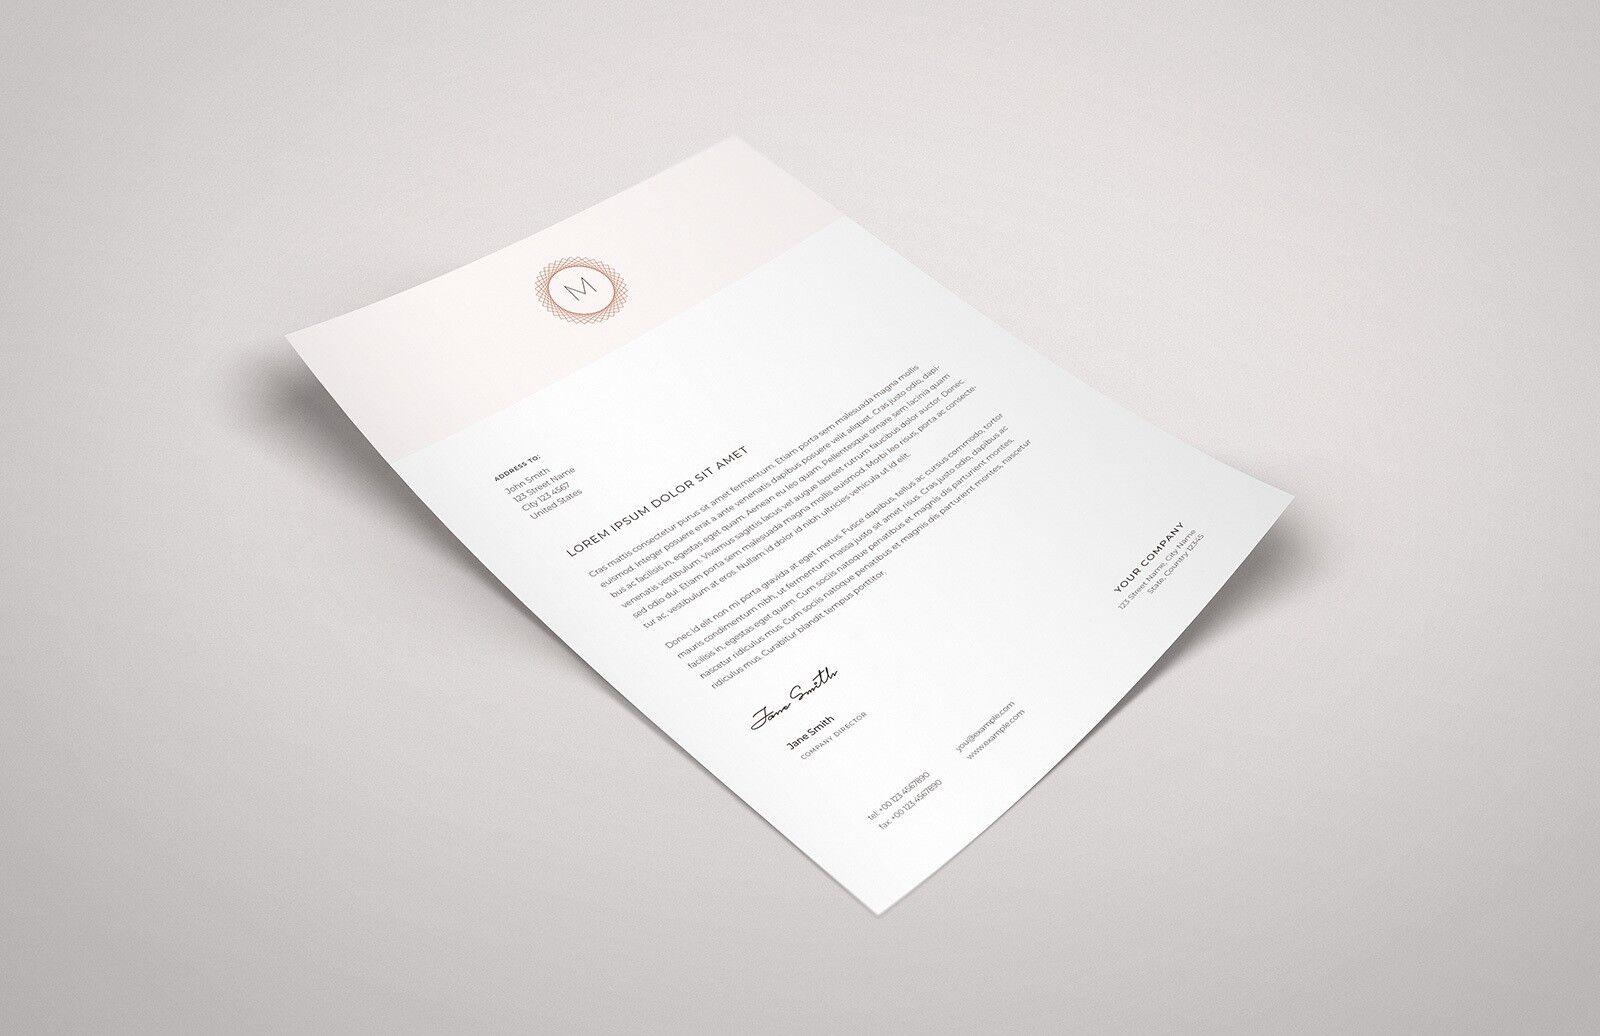 A4 Paper Mockup Set with Three Different Shots FREE PSD